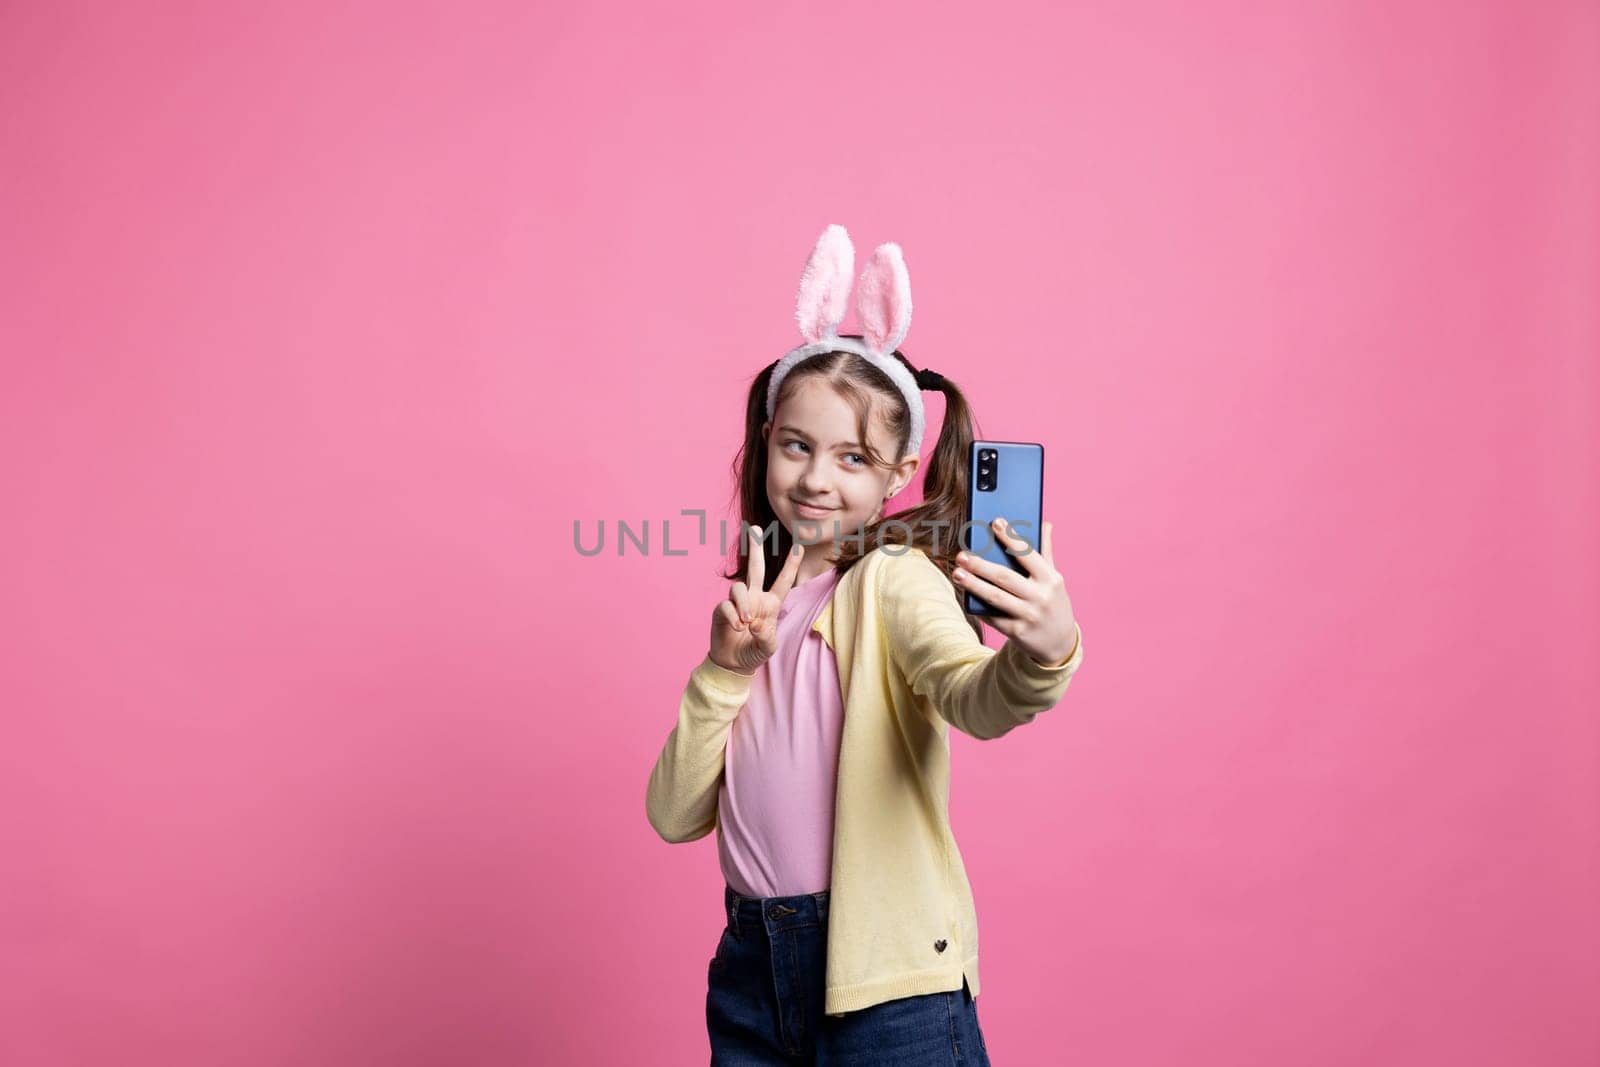 Joyful happy child taking pictures and showing peace sign on phone by DCStudio